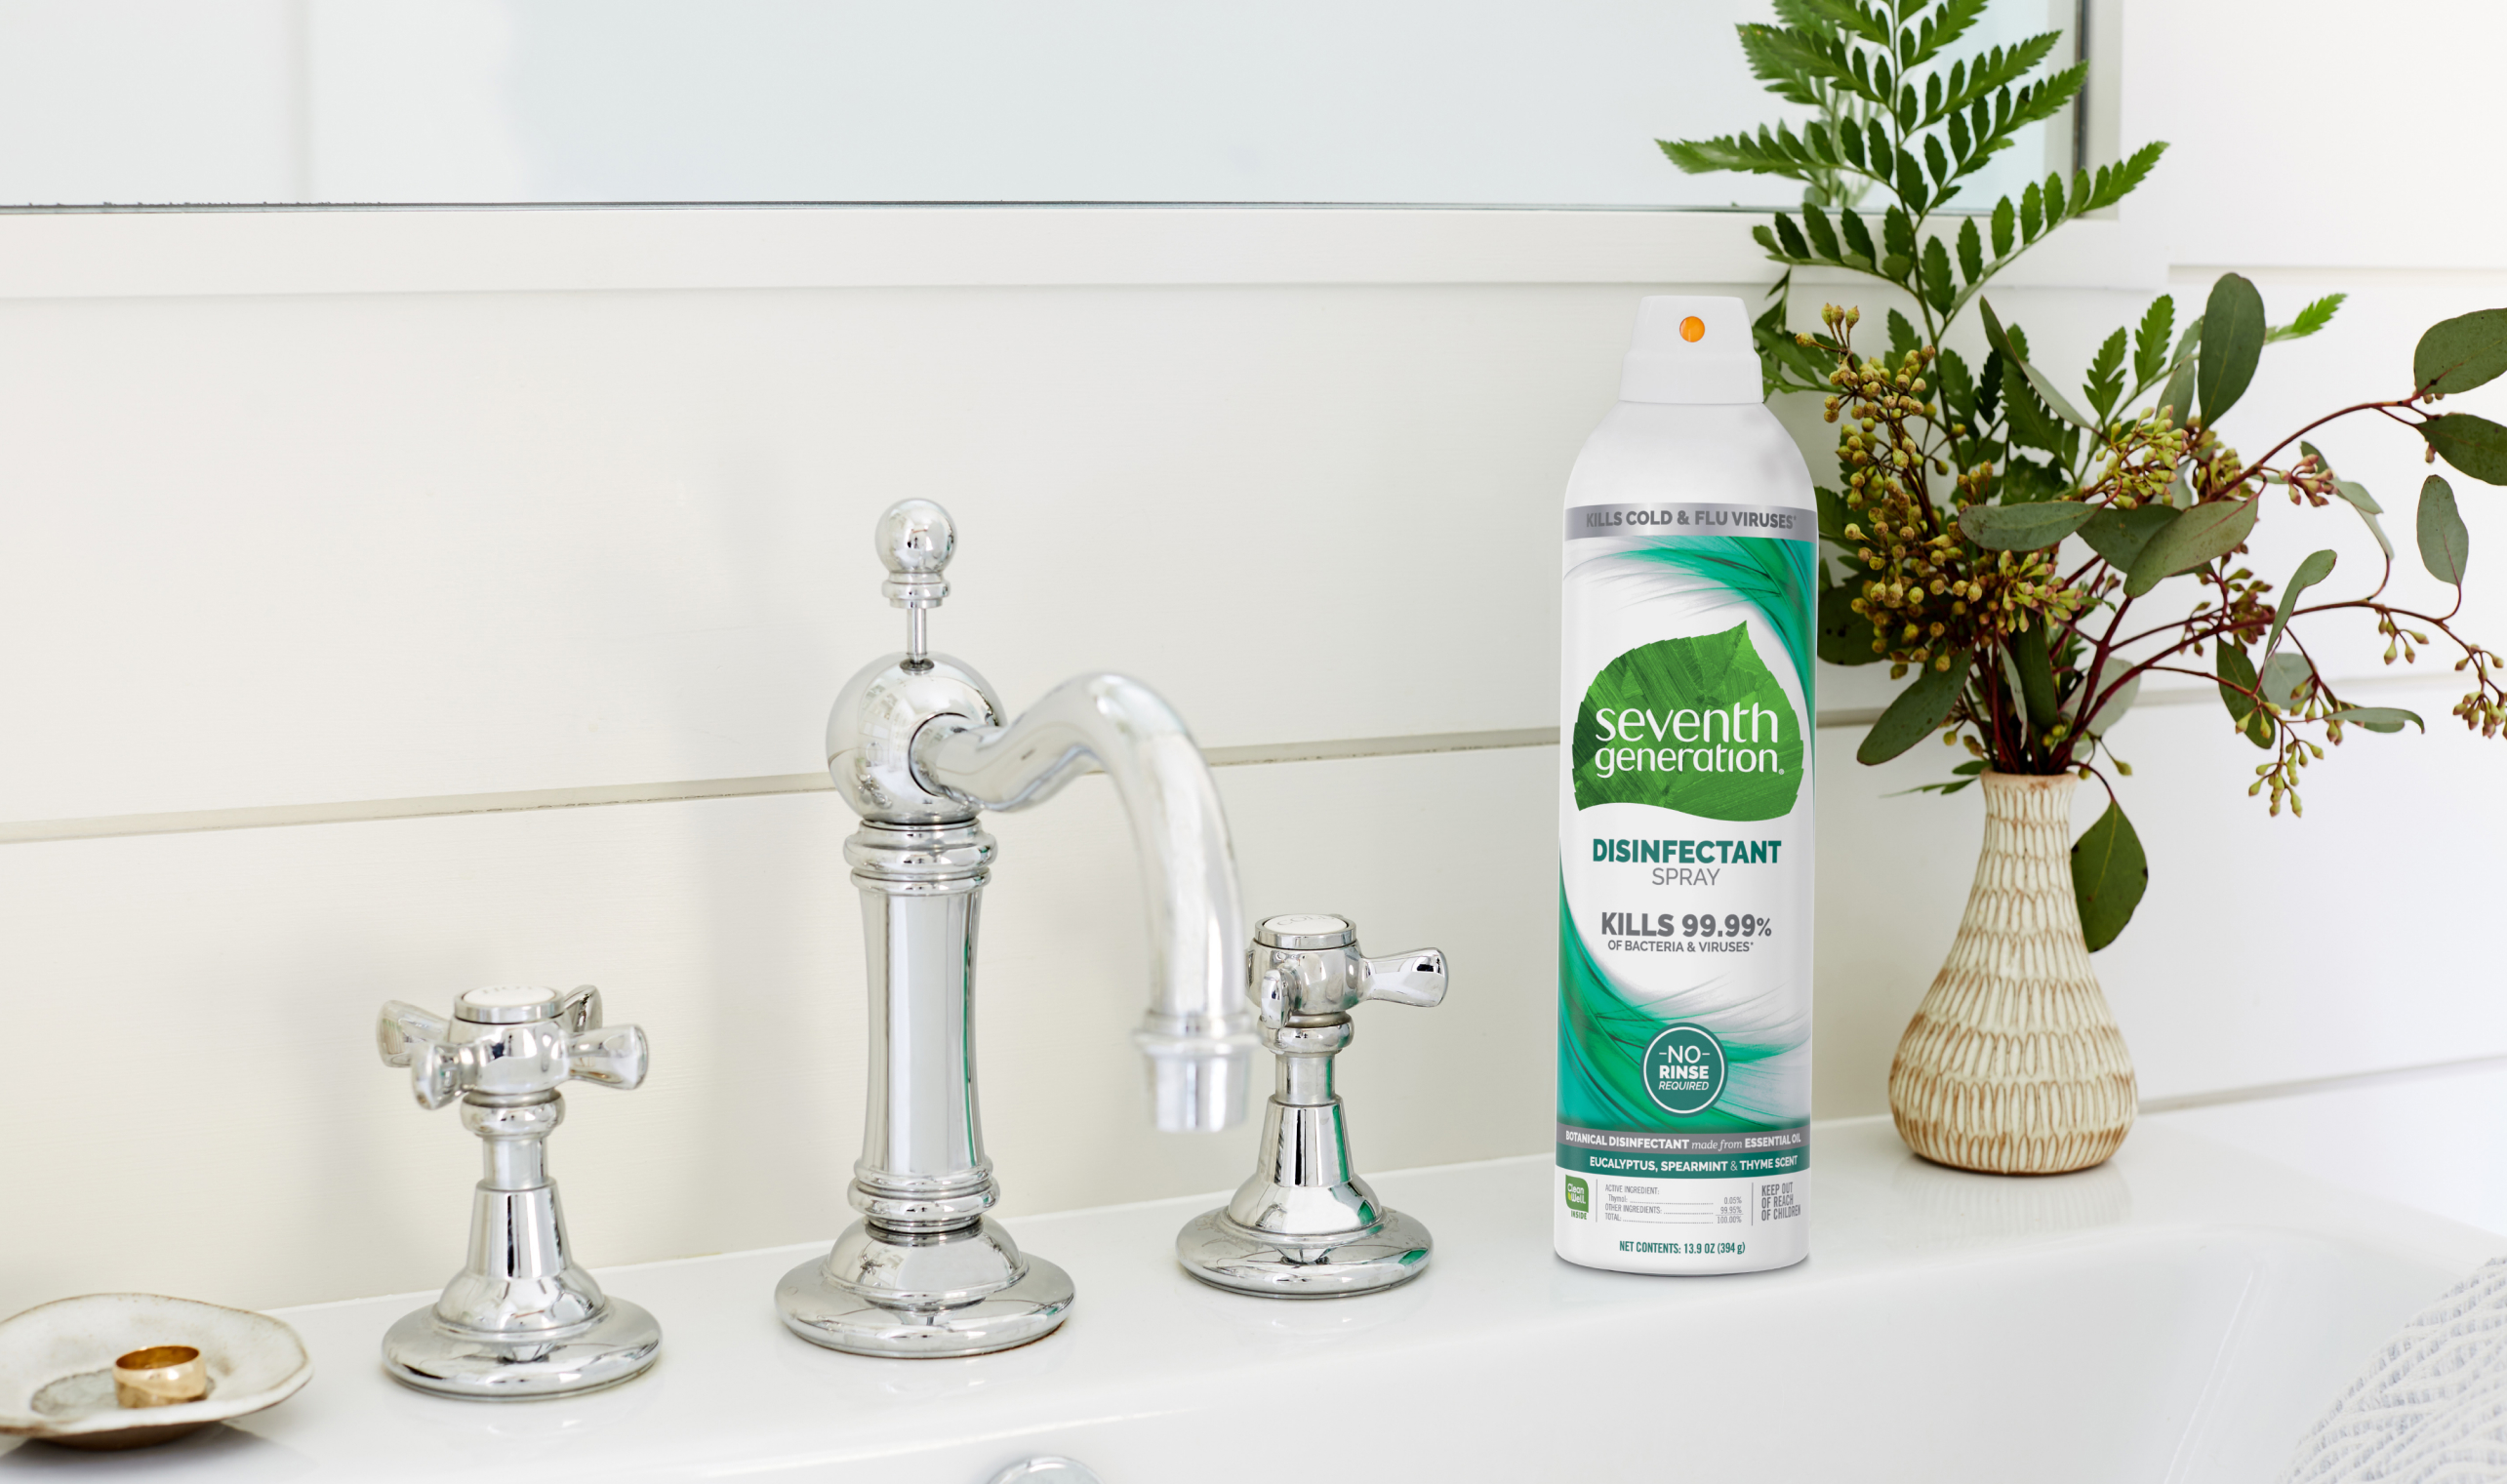 Seventh Generation Disinfectant Spray on Sink Counter